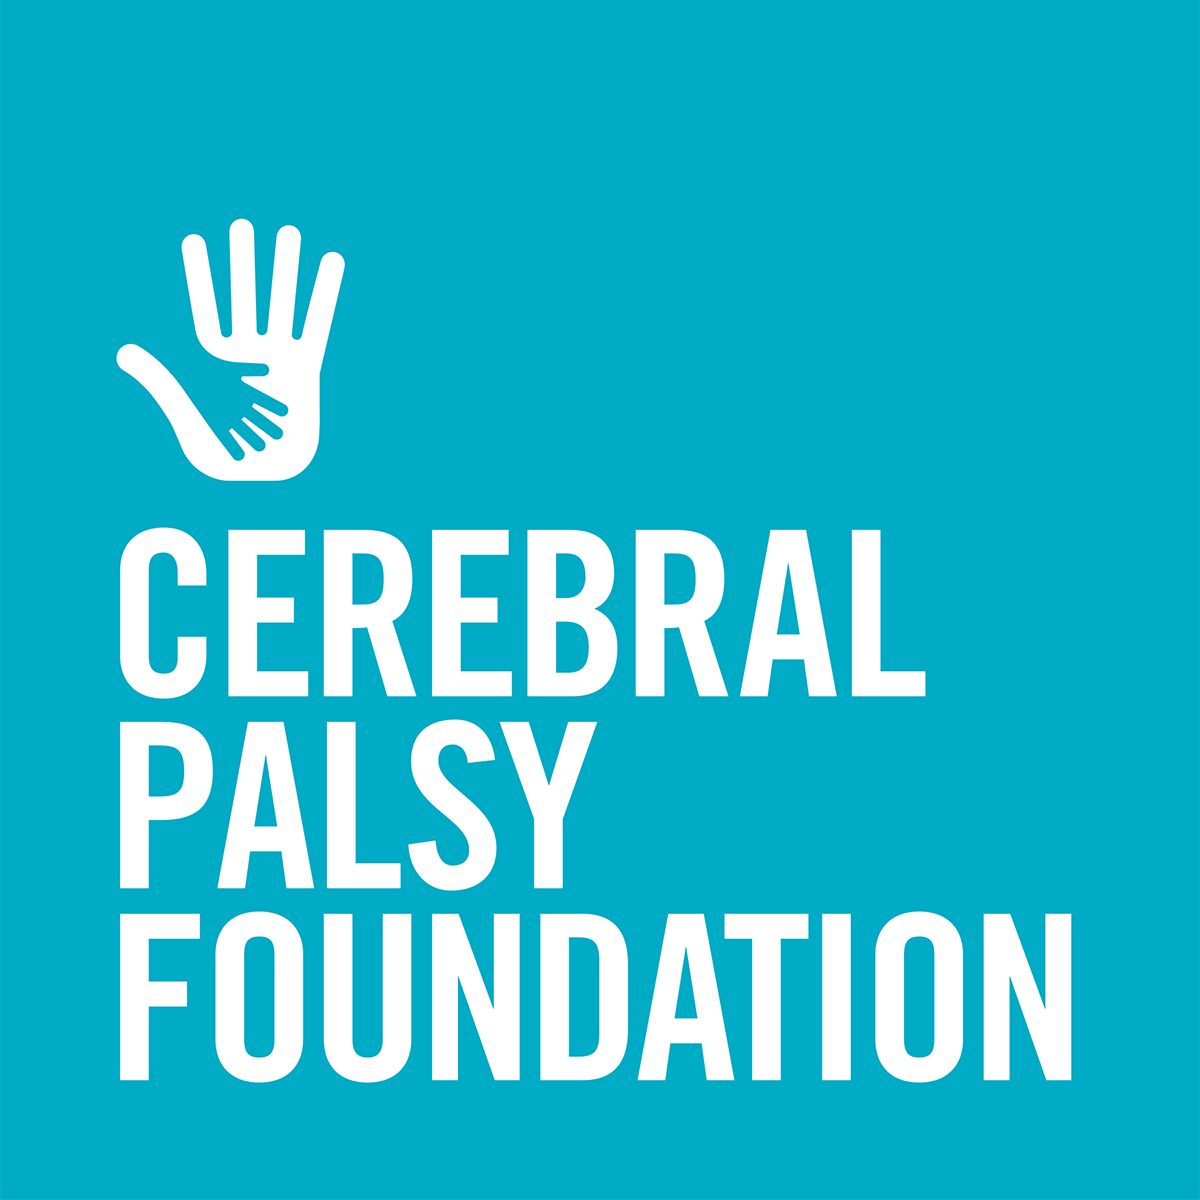 URGE CONGRESS TO INVEST IN CEREBRAL PALSY RESEARCH